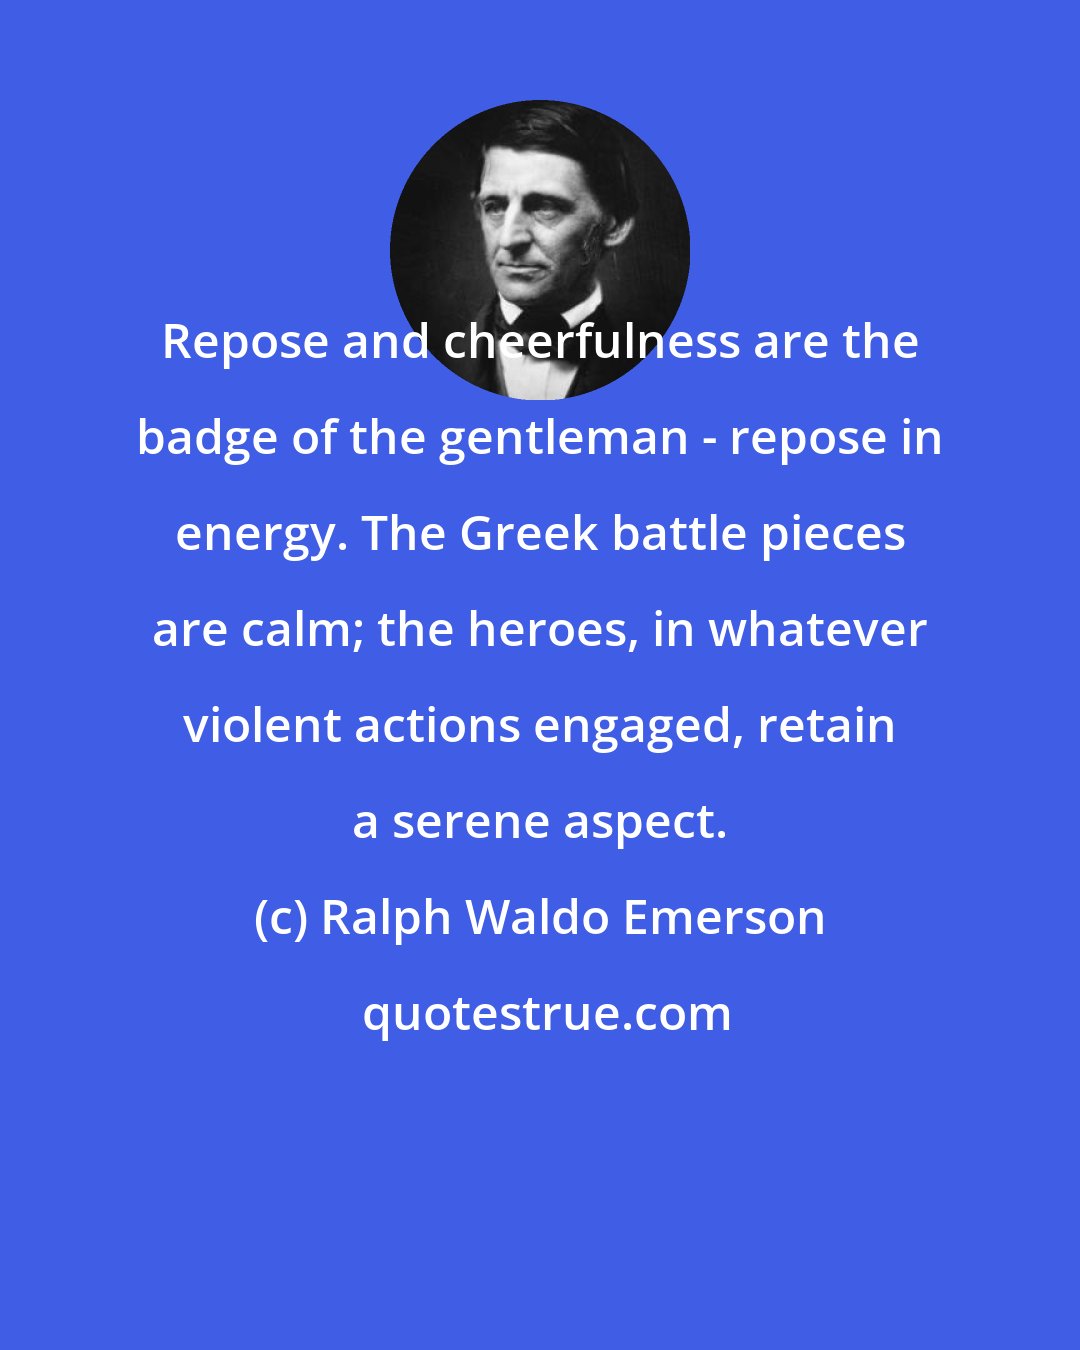 Ralph Waldo Emerson: Repose and cheerfulness are the badge of the gentleman - repose in energy. The Greek battle pieces are calm; the heroes, in whatever violent actions engaged, retain a serene aspect.